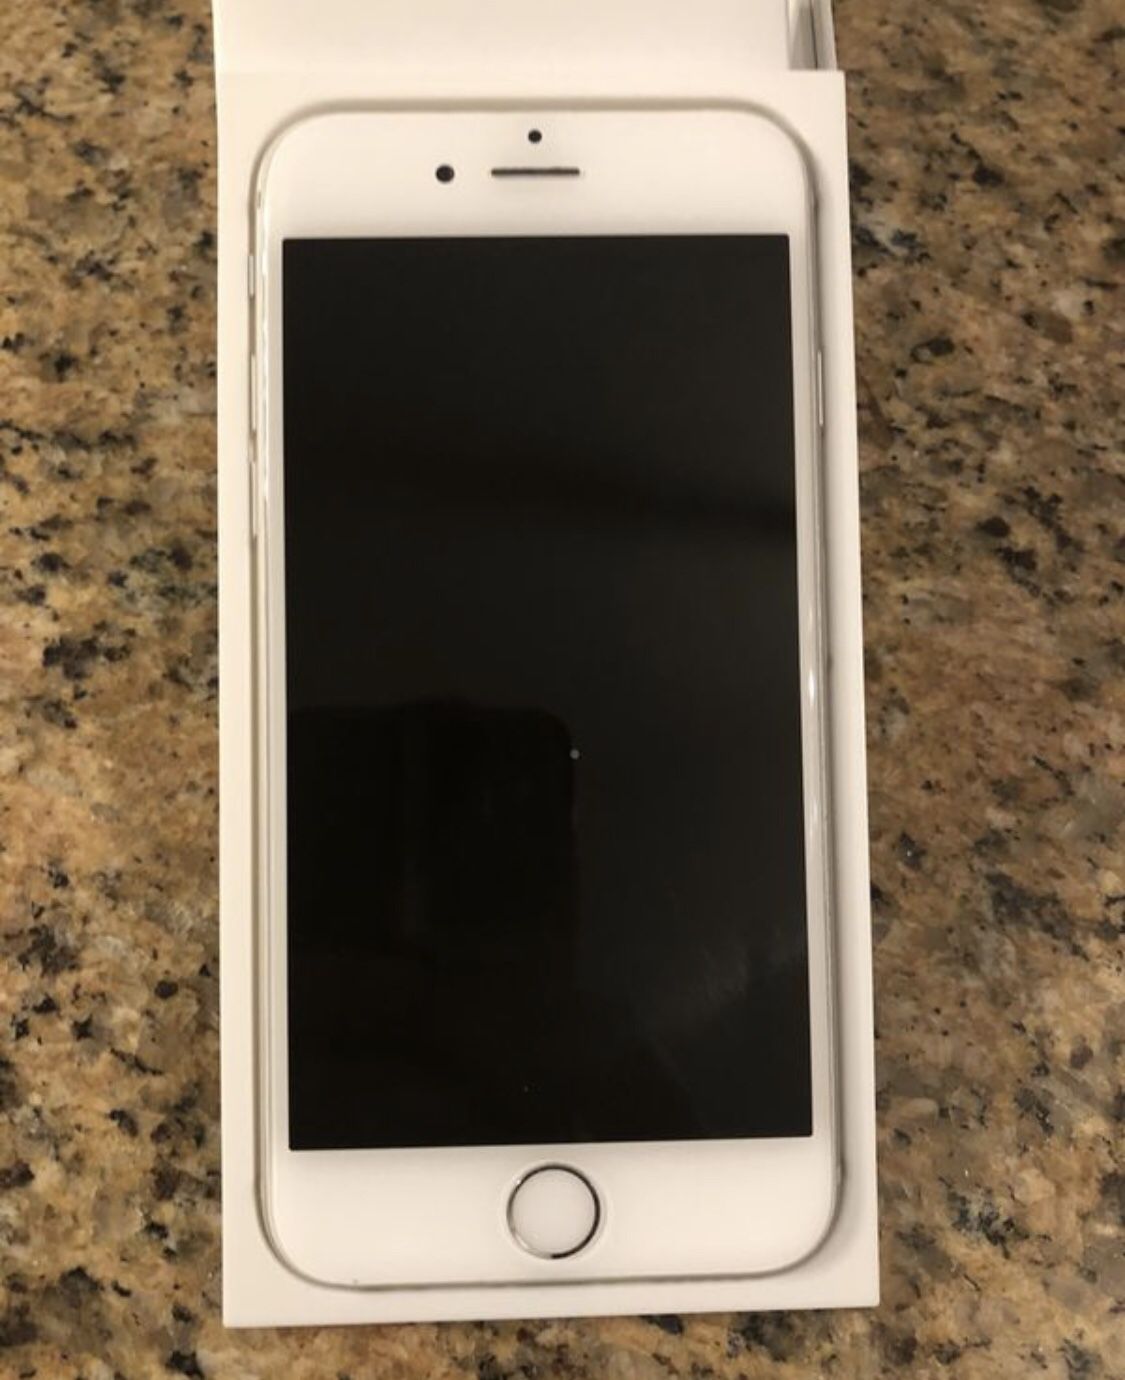 Apple iPhone 6 Silver 16 GB Box and accessories included for Sale in WA - OfferUp